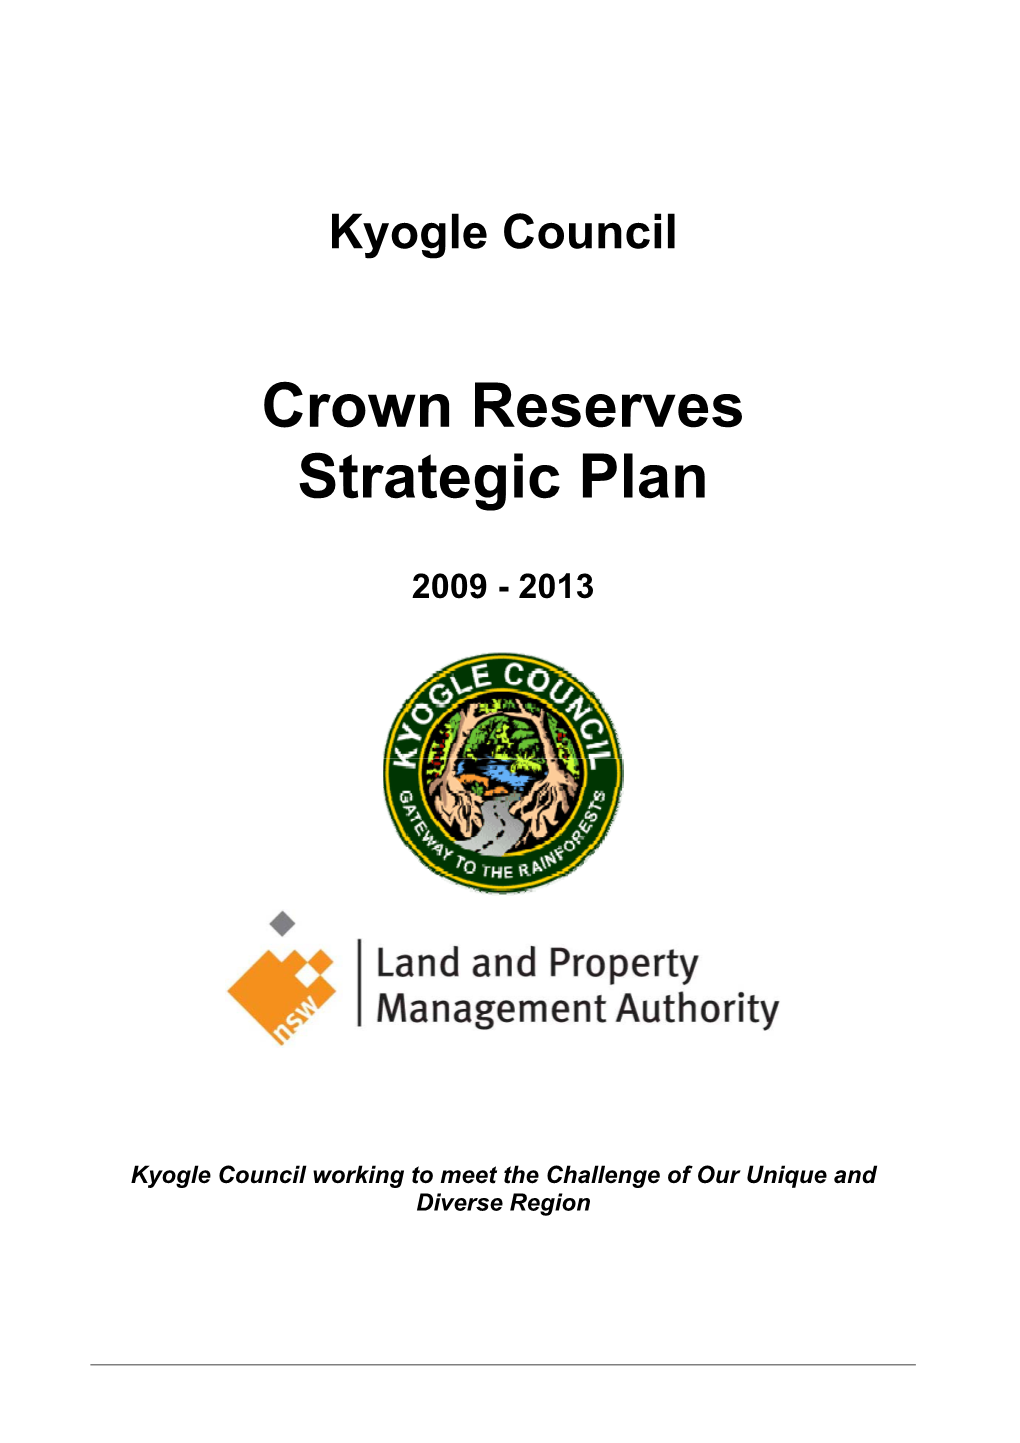 Kyogle Crown Reserves Strategic Plan Has Been Initiated by Kyogle Council to Support Its Key Role in the Management of the System in the Kyogle Local Government Area